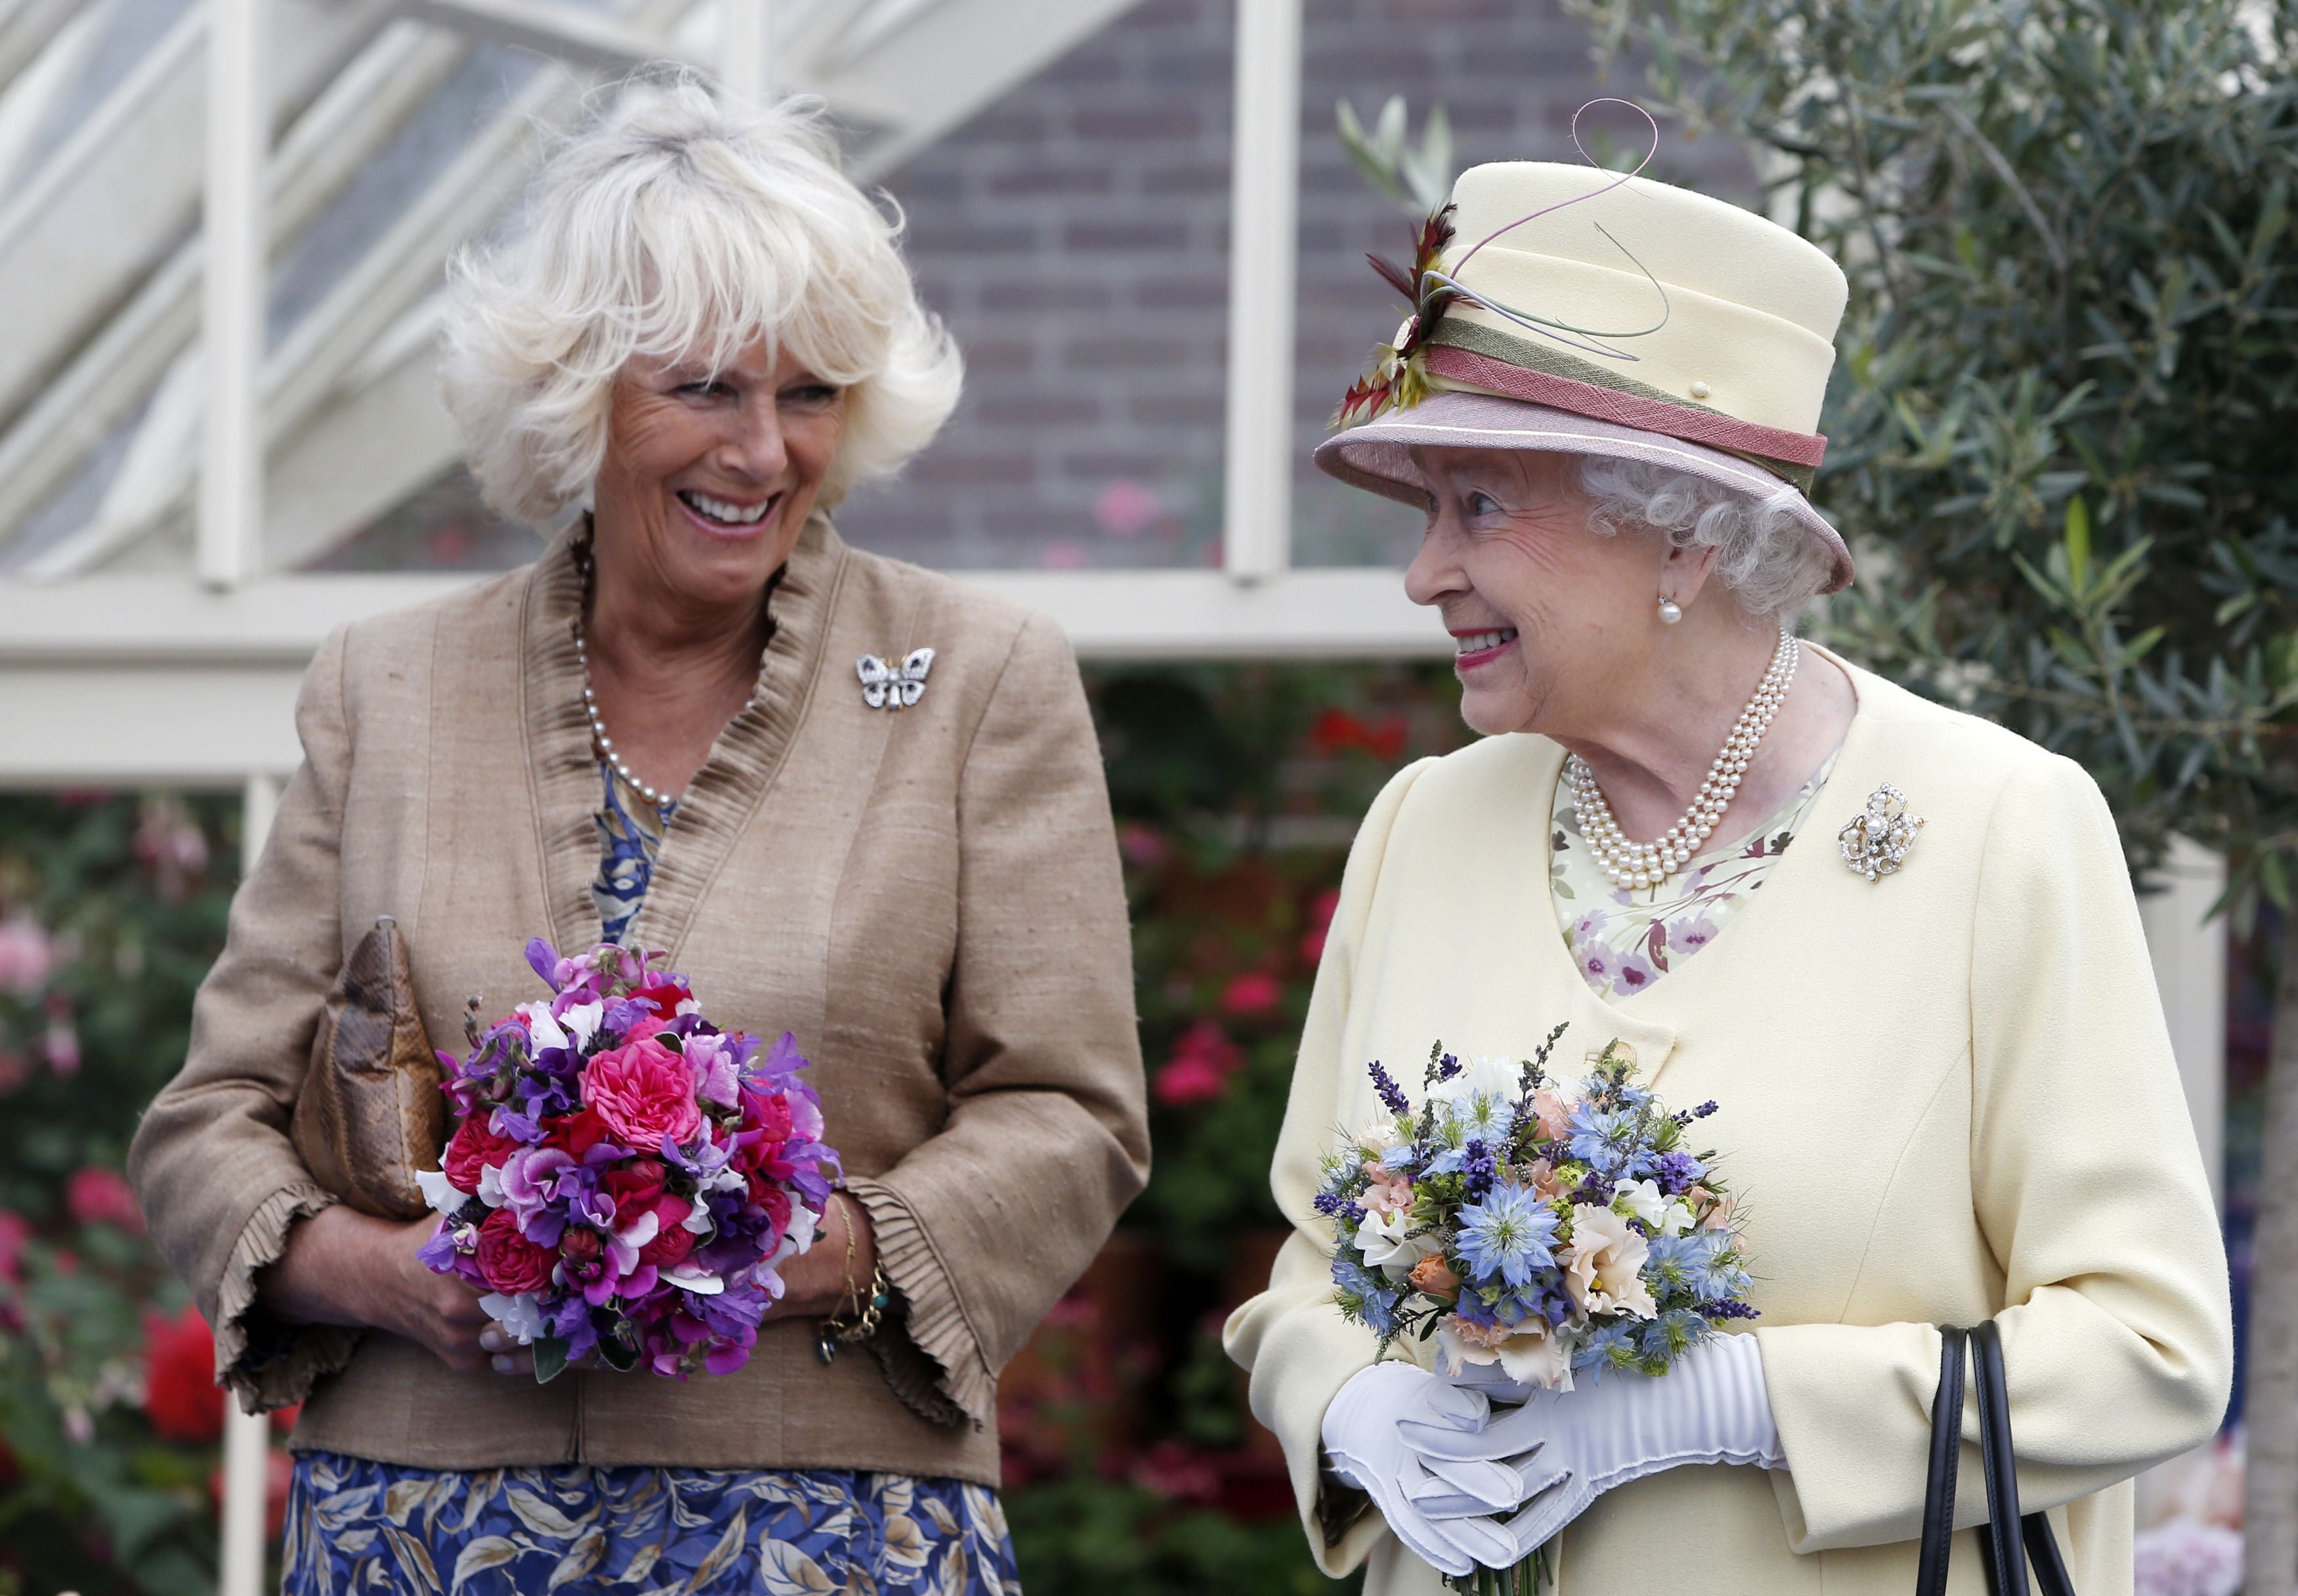 Camilla remembers the Queen’s eyes and smile